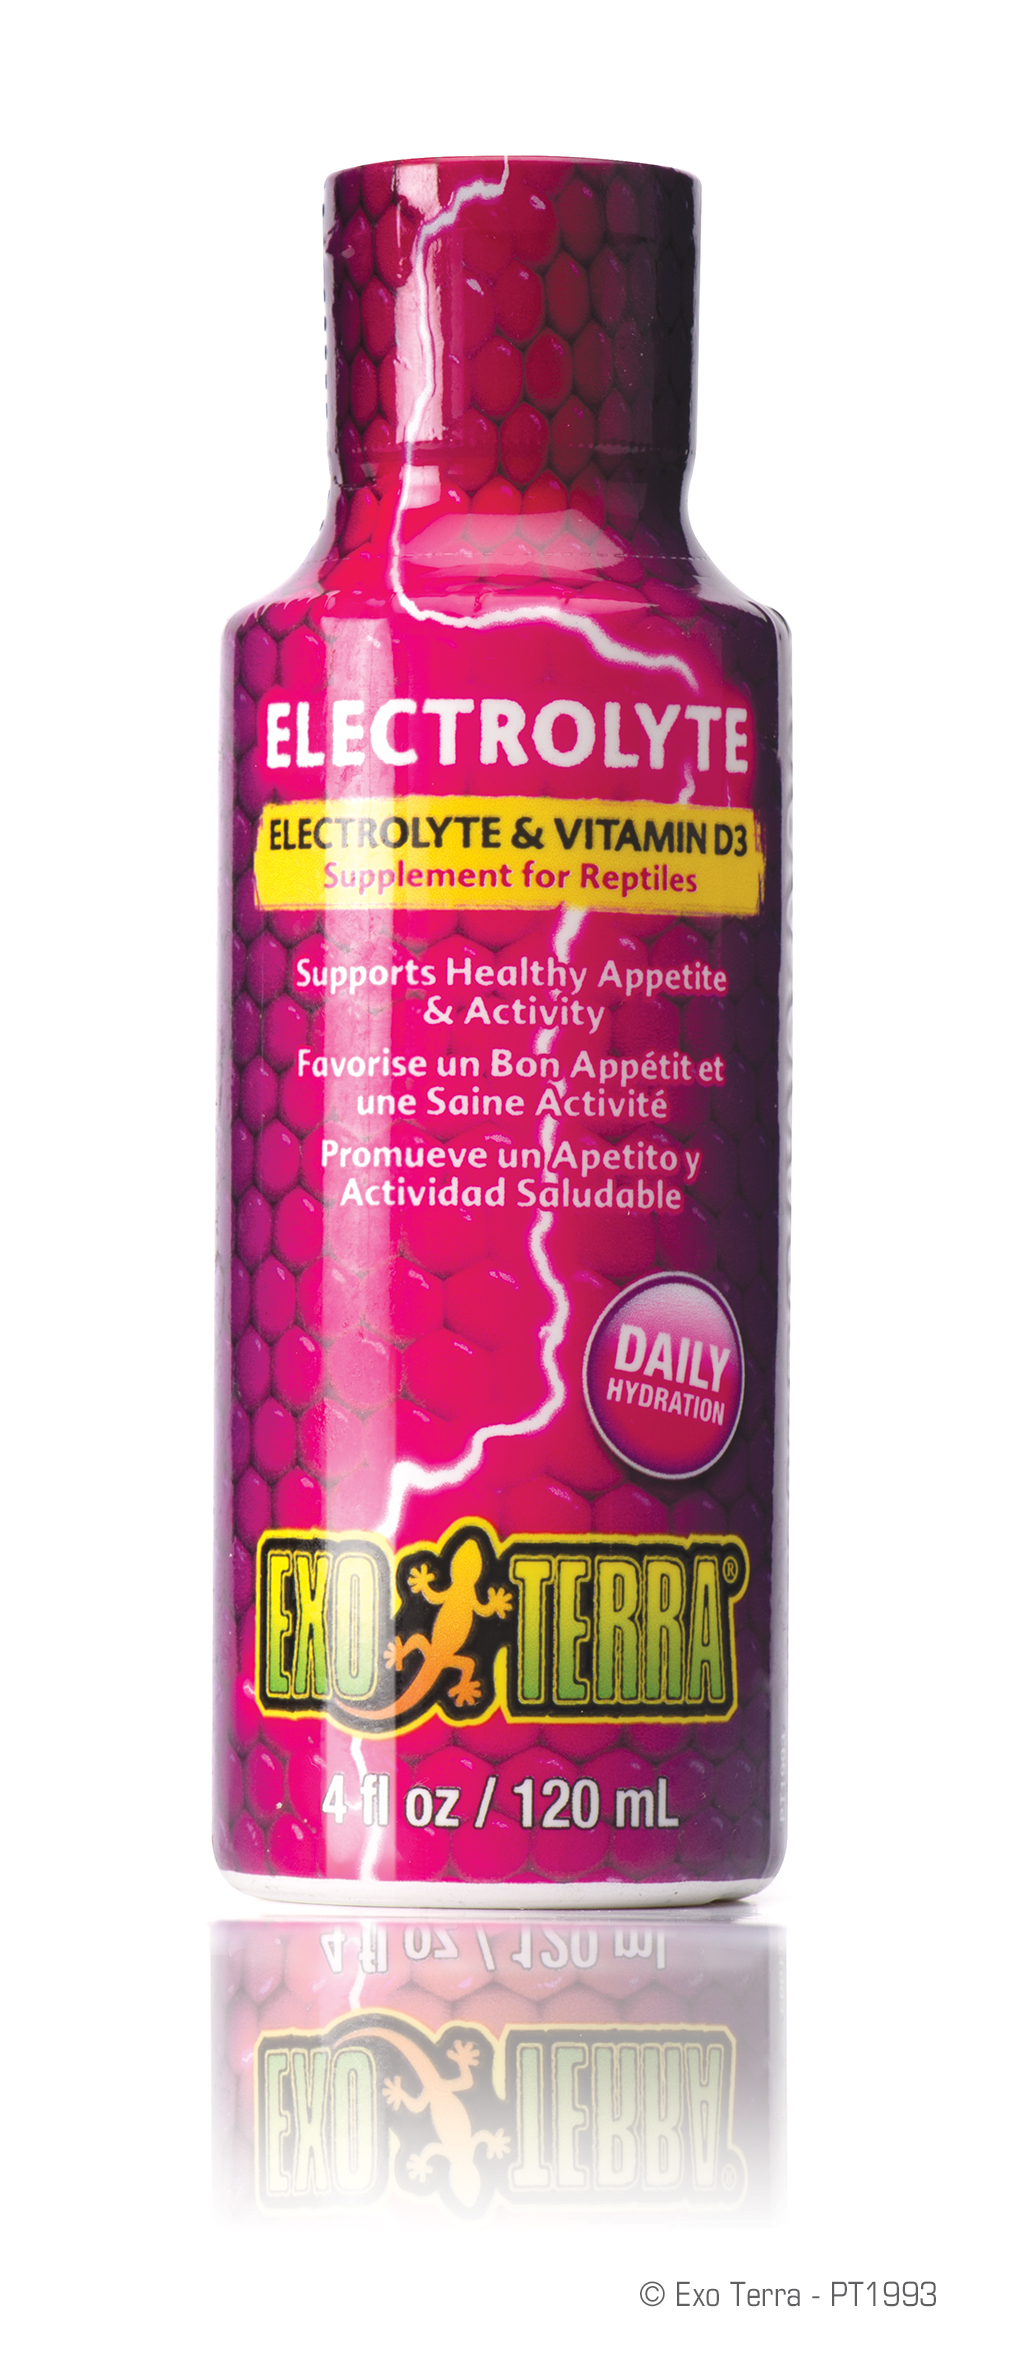 Ex electrolyte & vitamine d supplement - Product shot